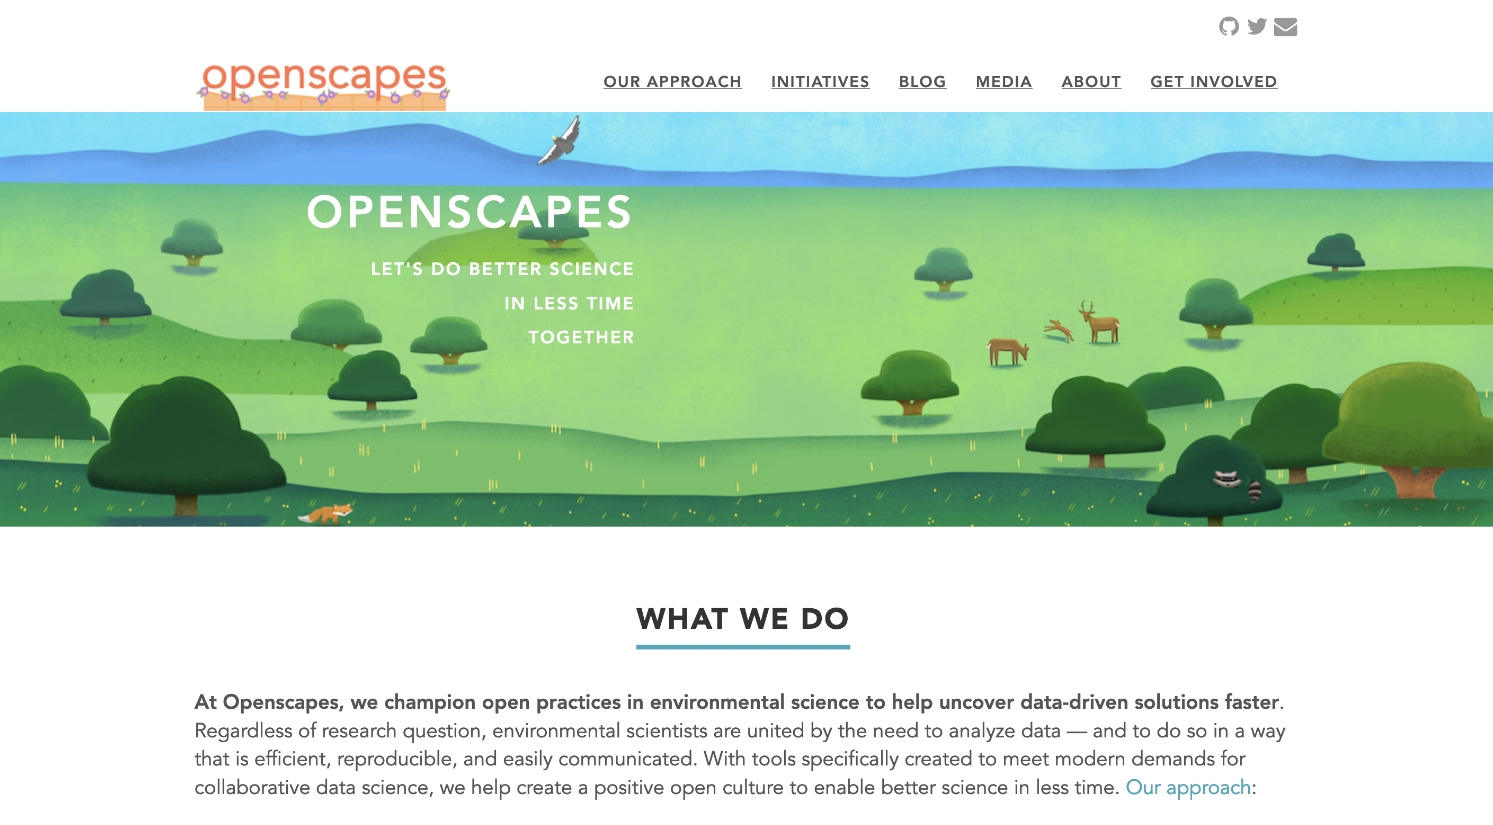 The old Openscapes website landing page, built with blogdown. A banner image reads "OPENSCAPES Let's do better science in less time together" on top of a grassy landscape drawing with trees, deer, a raccoon, and a fox. A condor soars overhead and blue mountains stretch across the background. Below the banner reads the header, "WHAT WE DO" underlined in blue